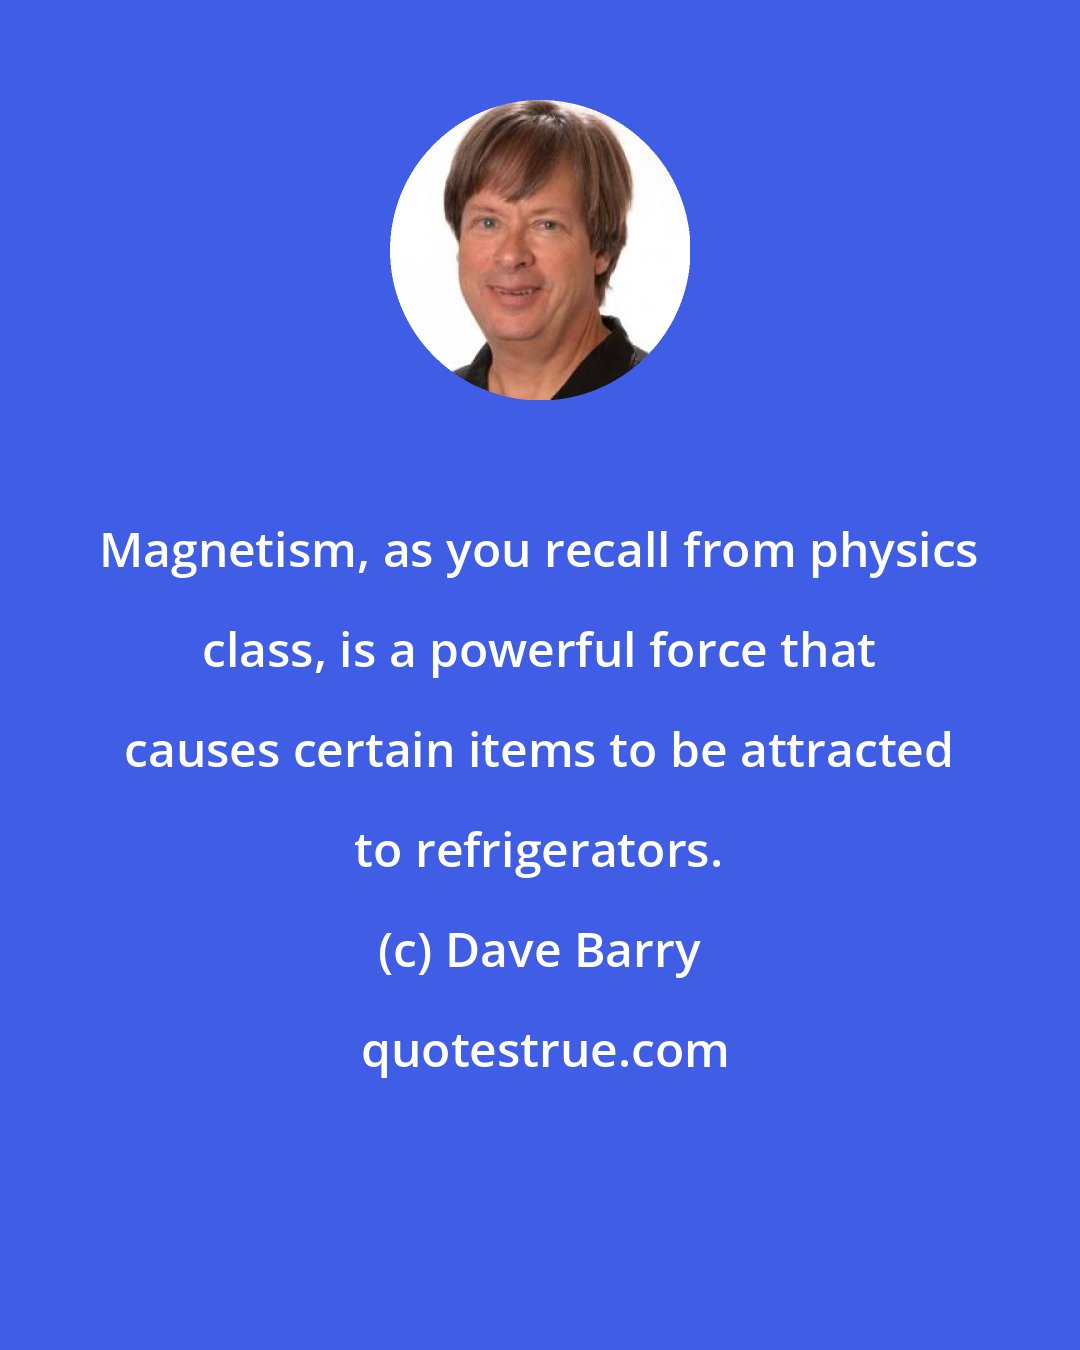 Dave Barry: Magnetism, as you recall from physics class, is a powerful force that causes certain items to be attracted to refrigerators.